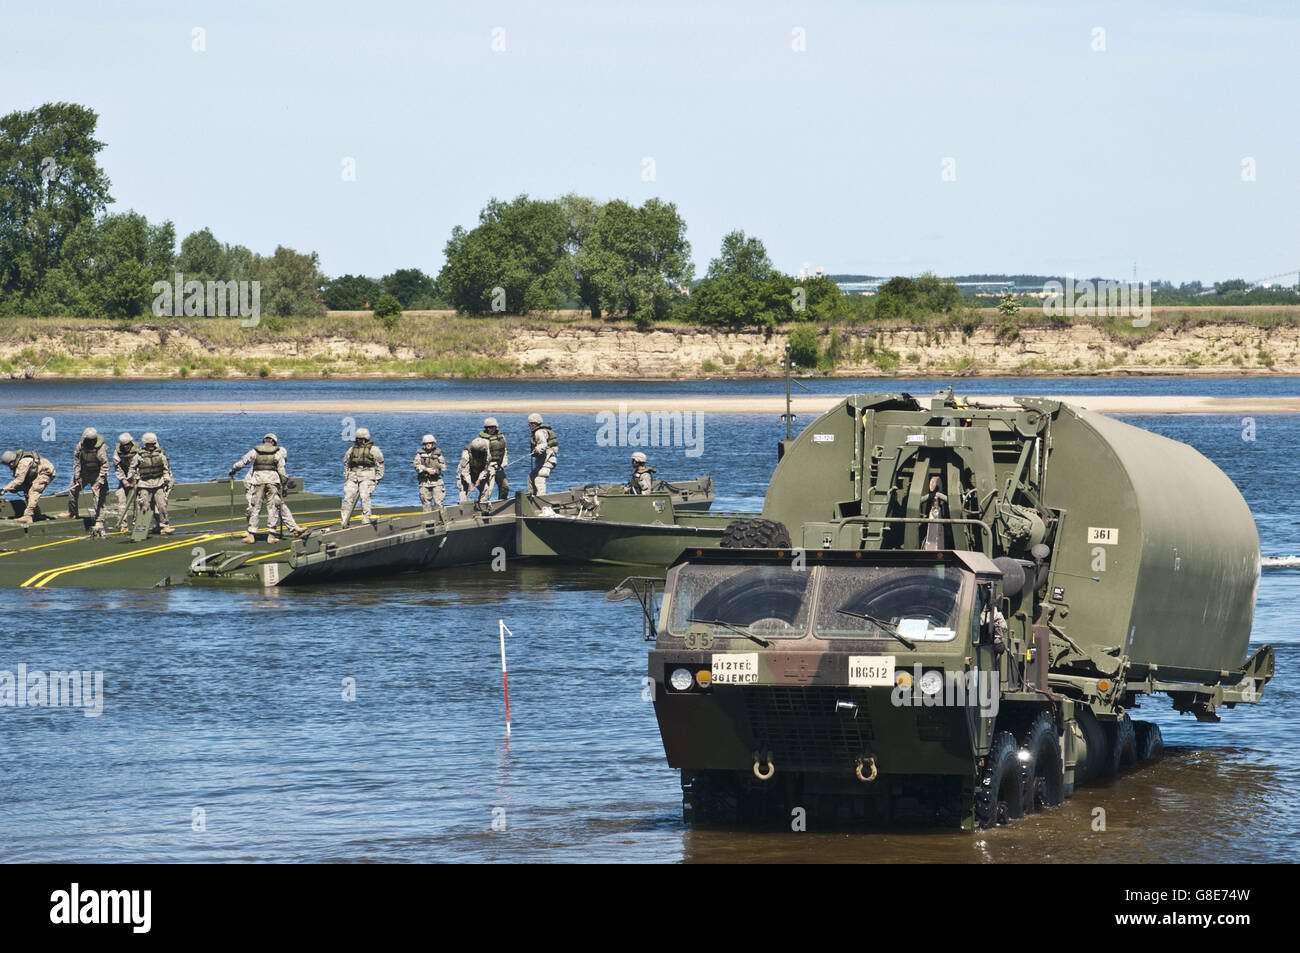 June 7, 2016 - Chelmno, Poland - U.S. Army Reserve Soldiers with the 361st Engineer Company from Warner Robins, Ga., sharpen their skills by constructing the Improved Ribbon Bridge on the Vistula River in Chelmno, Poland, as a part of Exercise Anakonda 2016, June 7. The IRB is a sectional floating bridge that can be used to create a full bridge or to ferry vehicles and equipment across a body of water. Exercise Anakonda 2016 is a Polish-led, joint, multinational exercise taking place in Poland from June 7-17. This exercise involves more than 31,000 participants from more than 20 nations. Exerc Stock Photo